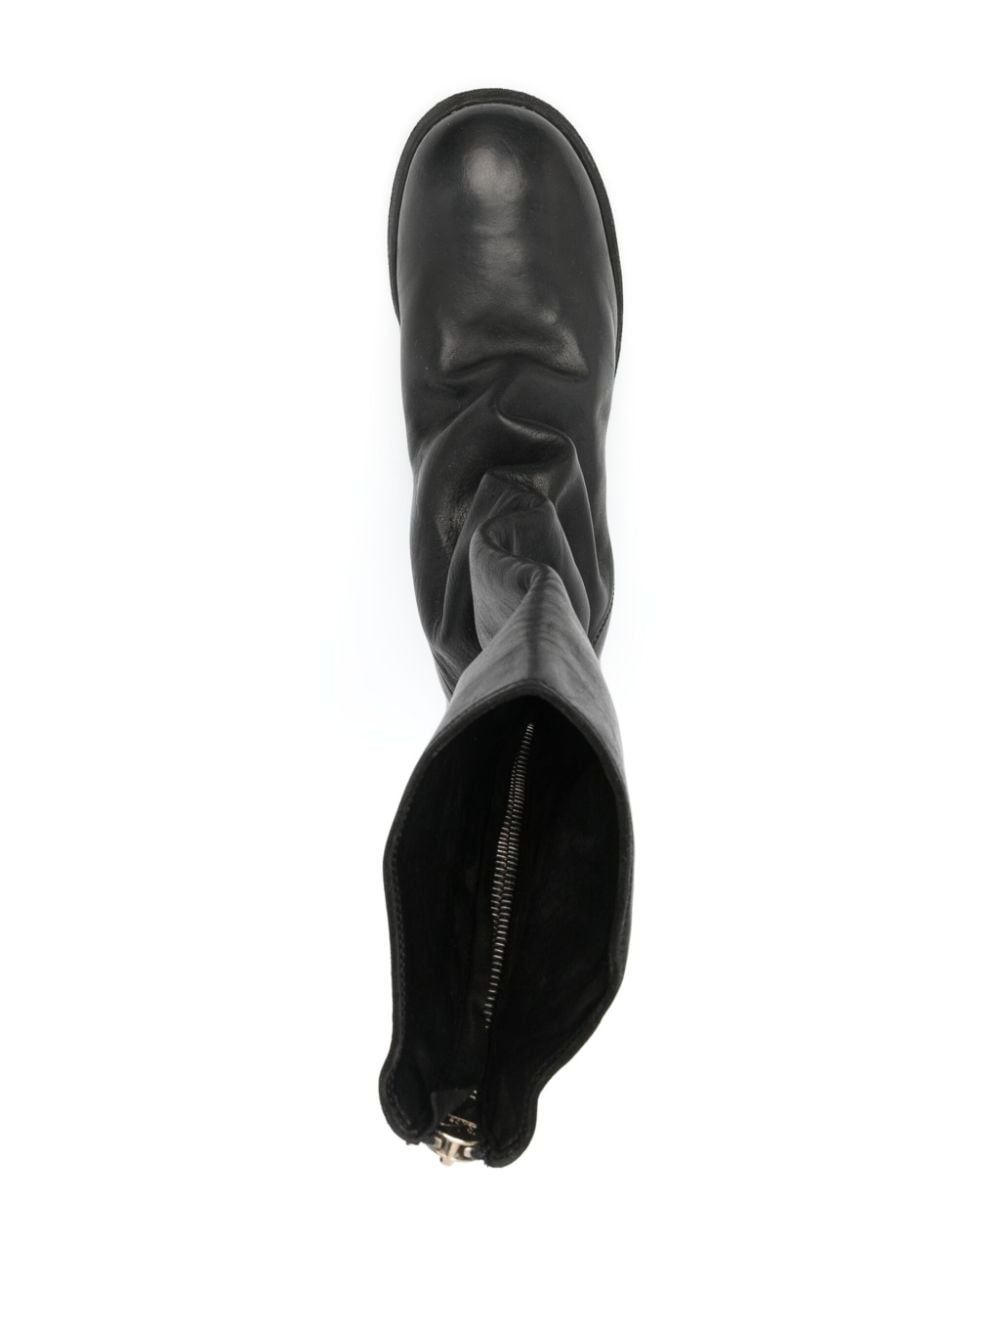 45mm leather boots - 4